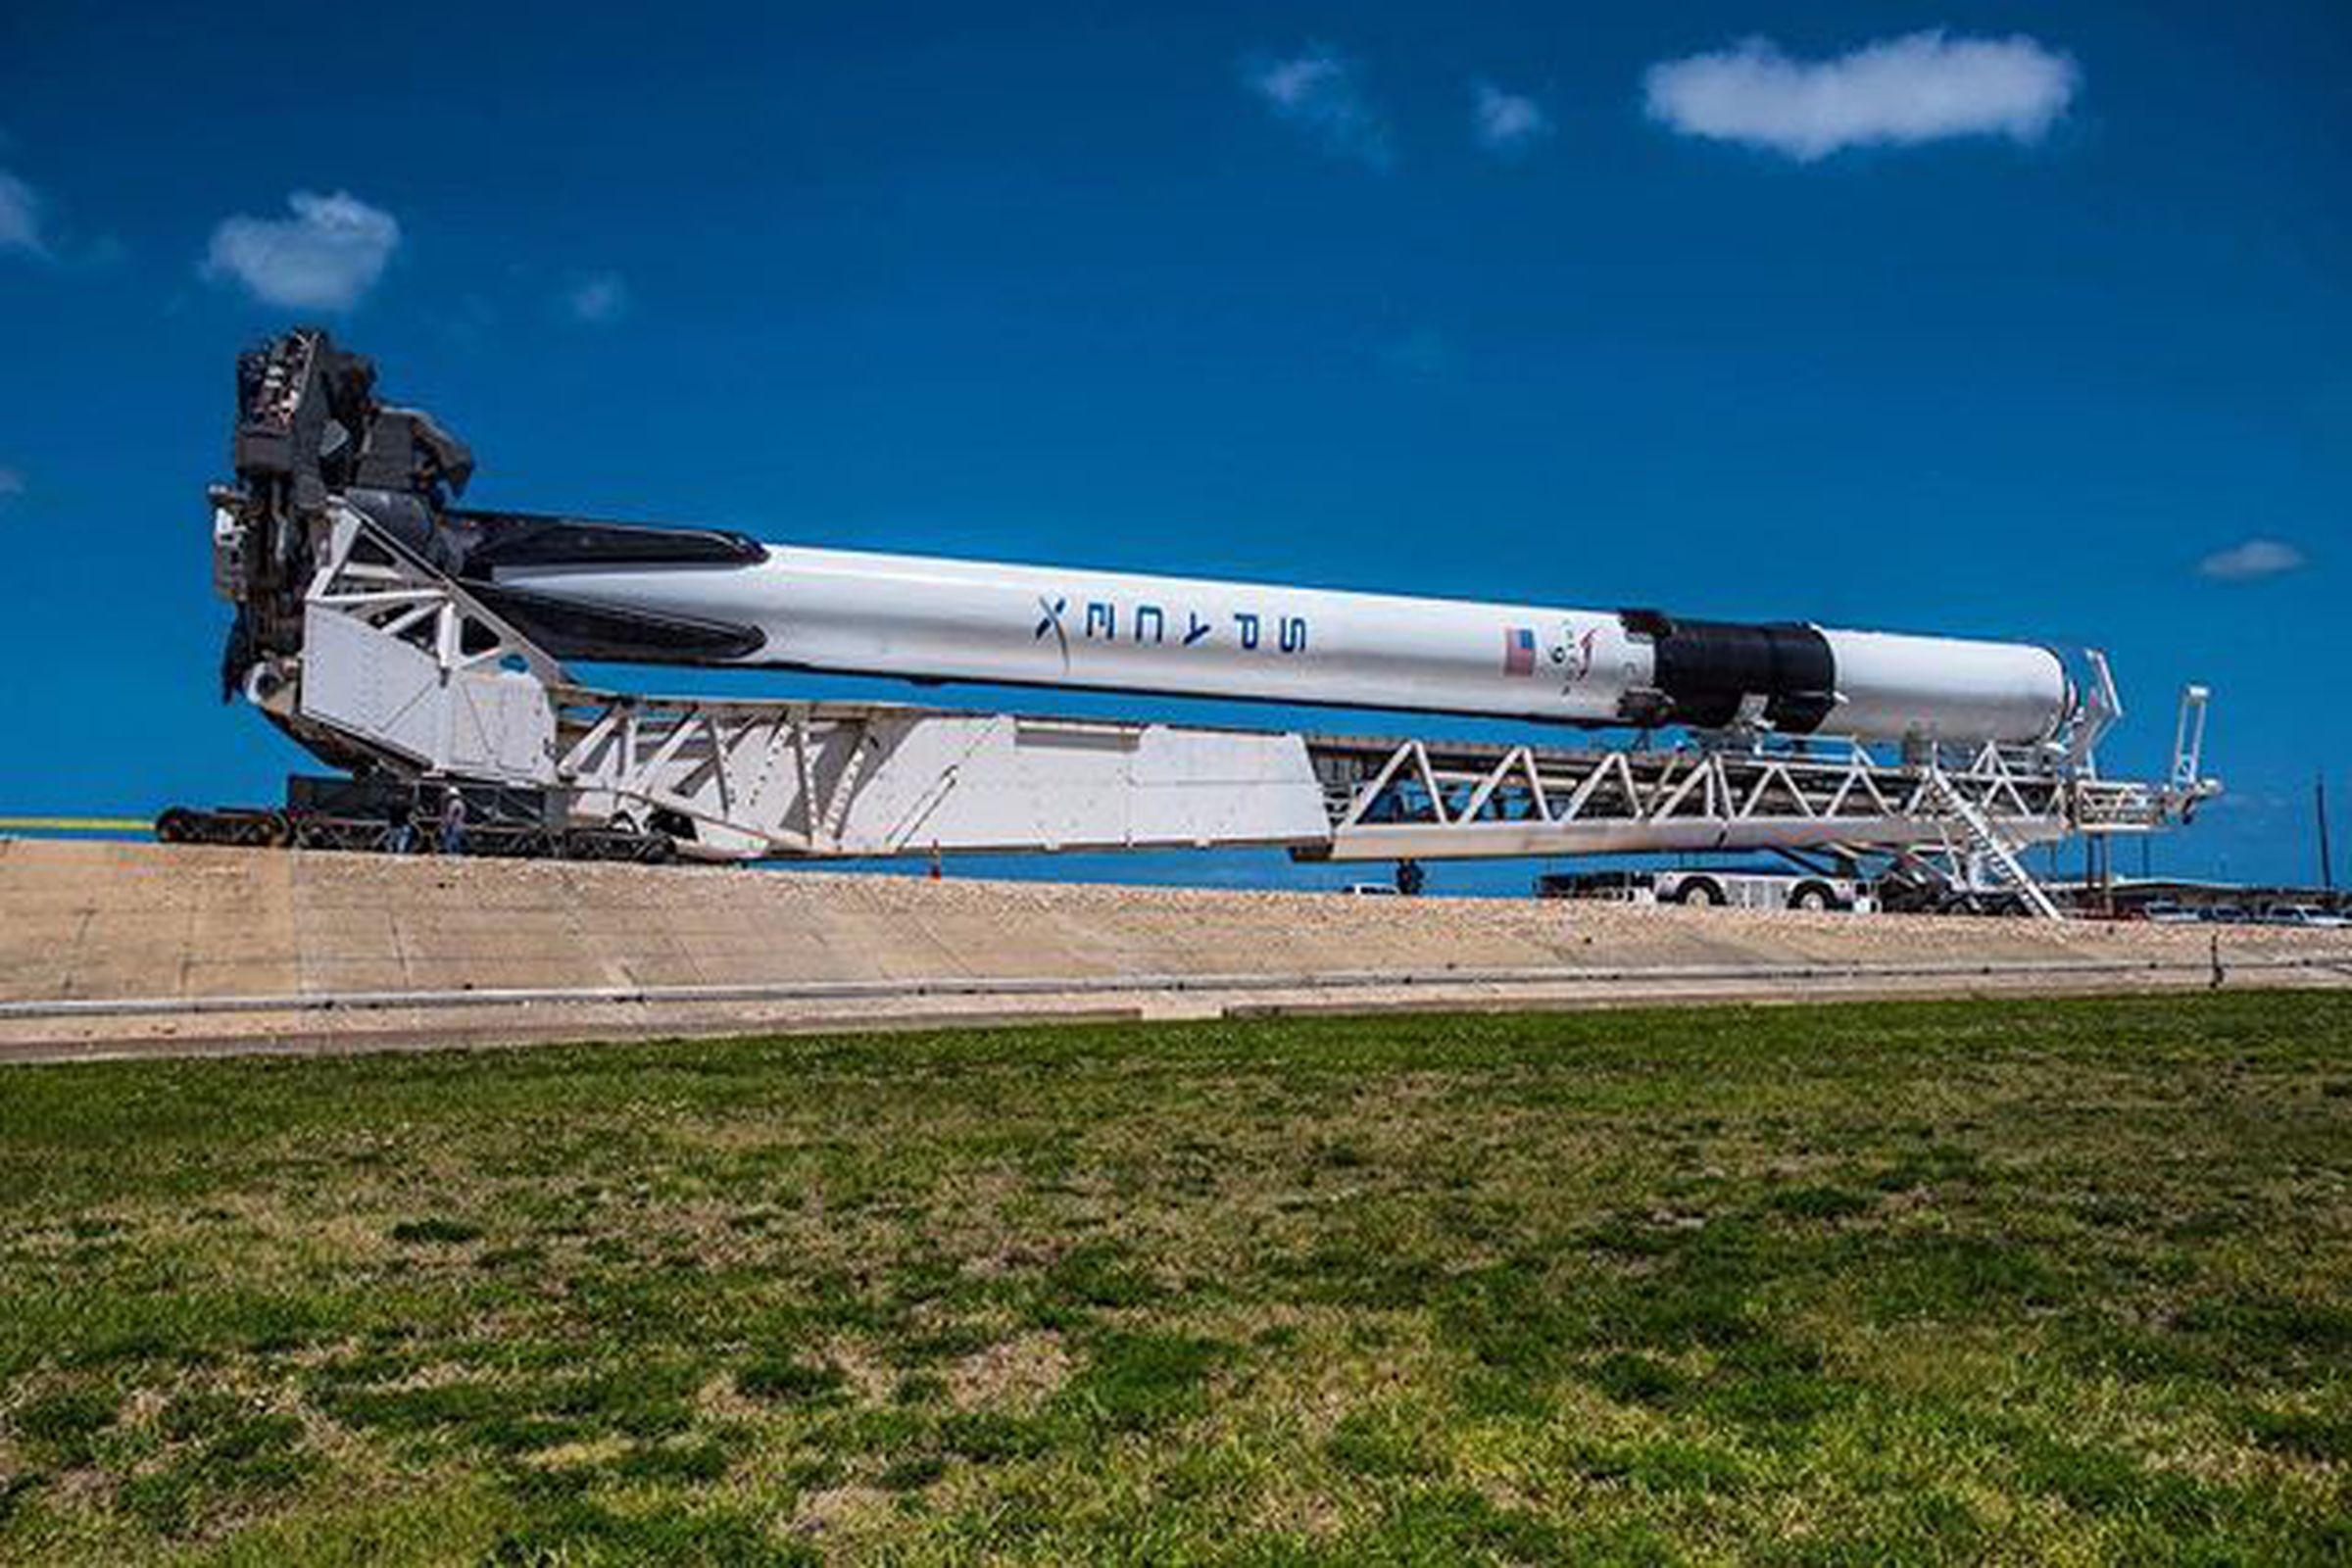 SpaceX’s Block 5 Falcon 9 rolling out to its launchpad.